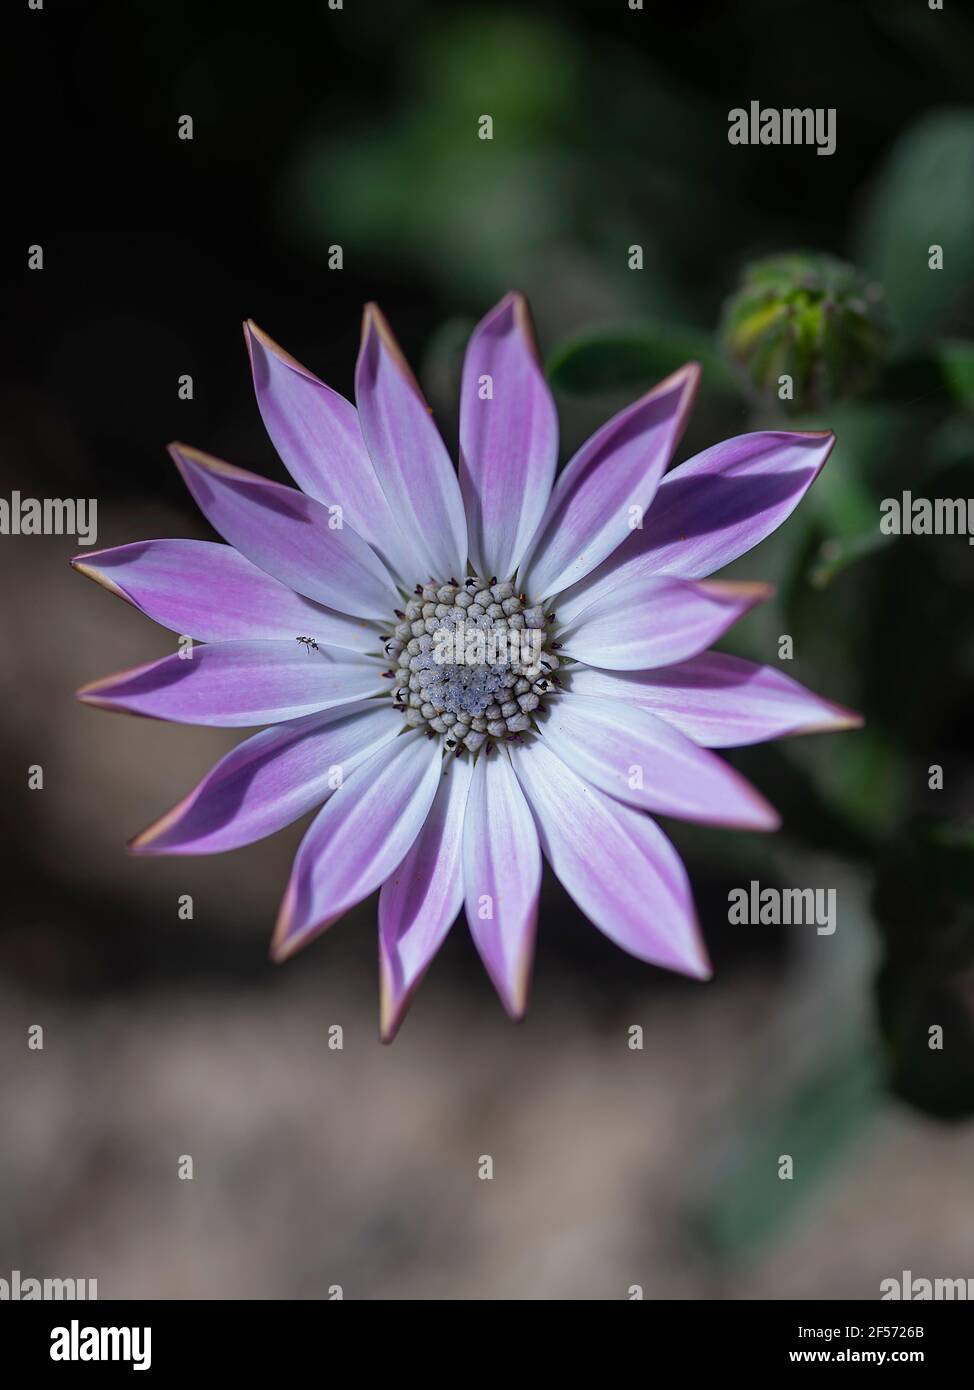 macro photography of purple daisy.close-up aerial photograph. Horizontal photograph, blurred background Stock Photo